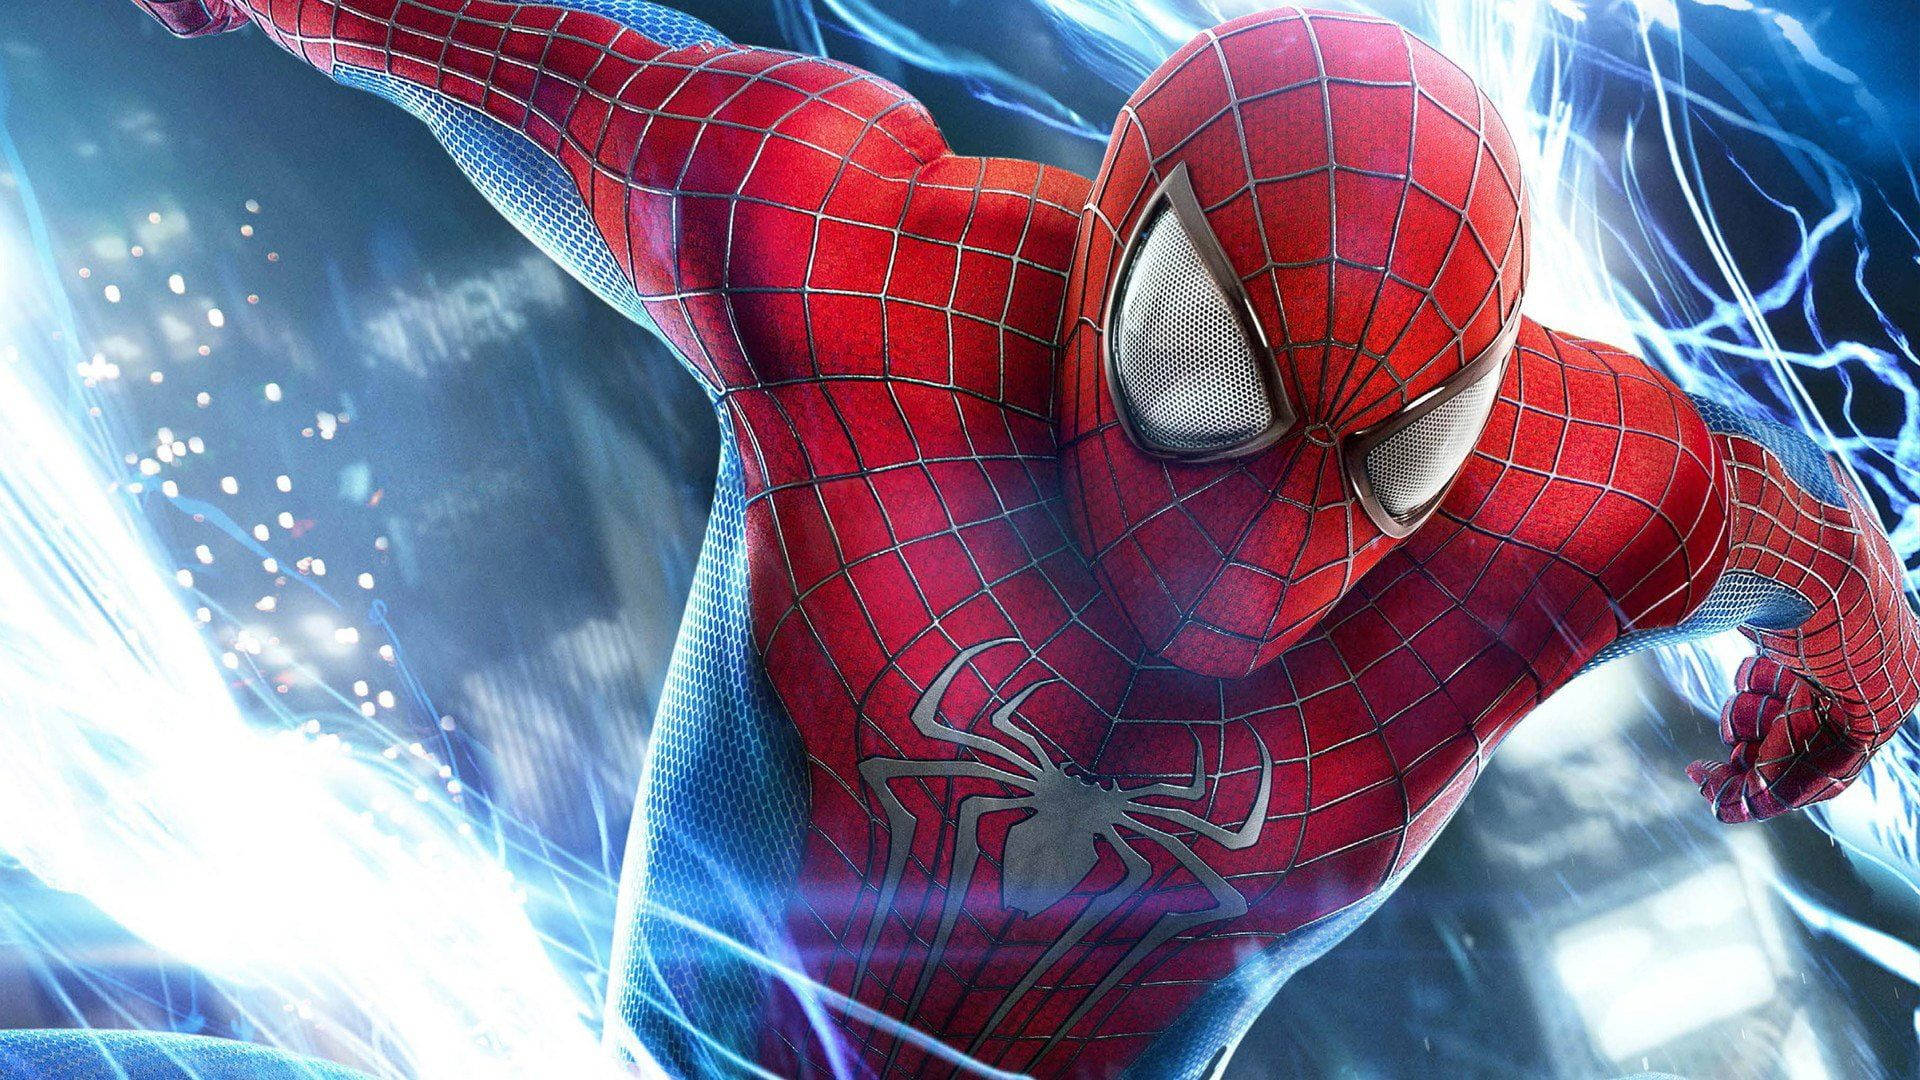 The Amazing Spider-Man Swings Into Action Wallpaper